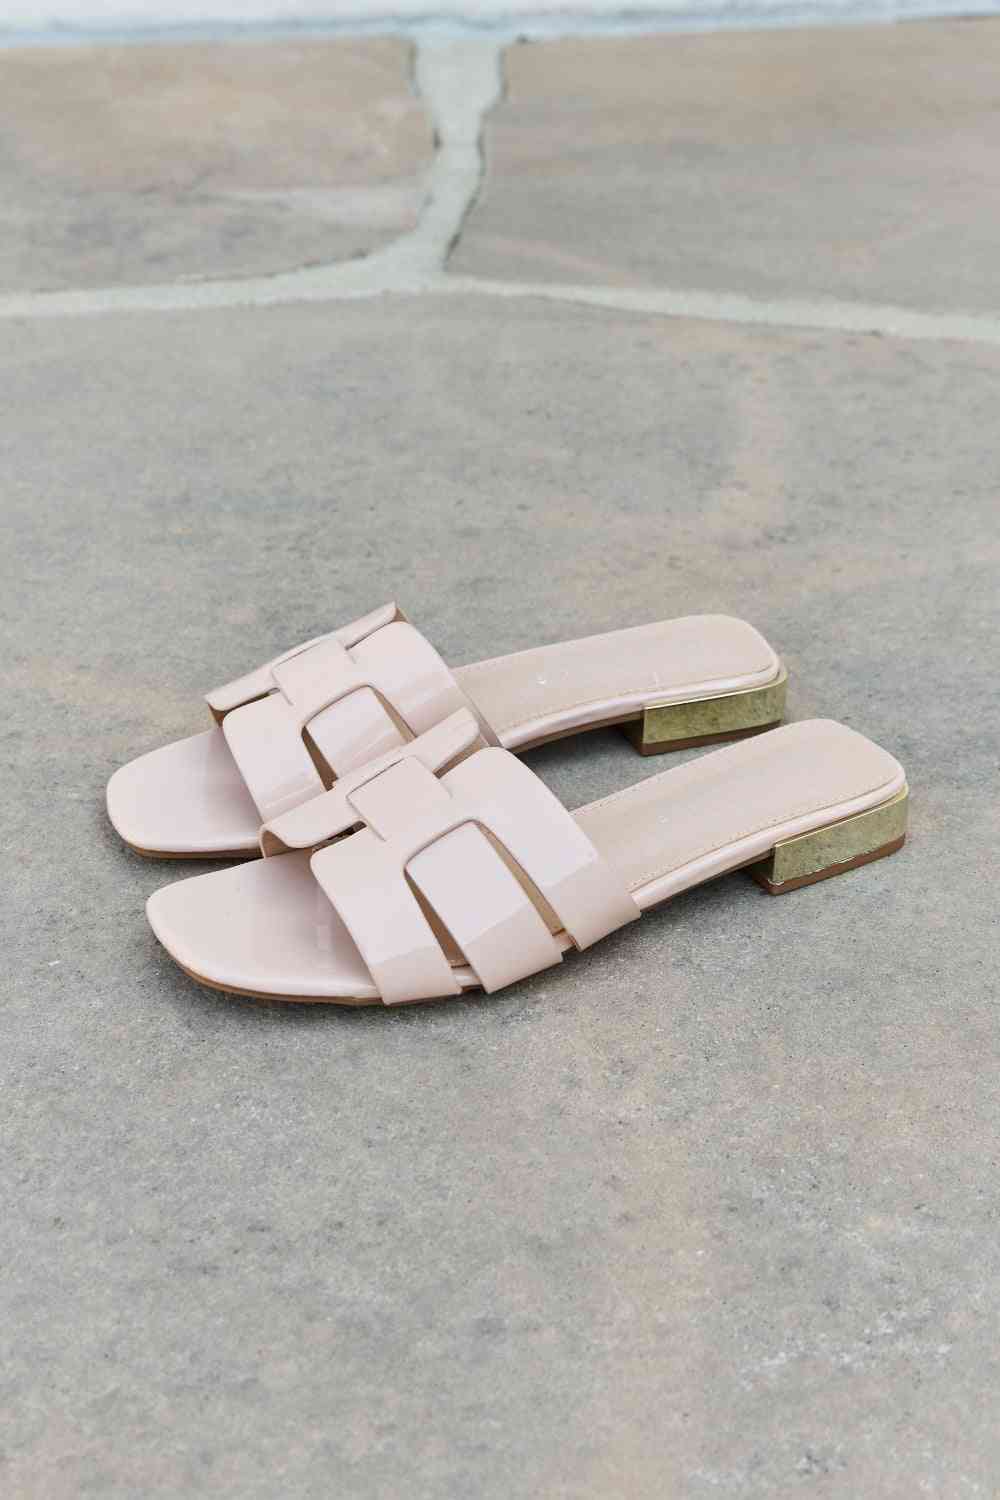 Weeboo Walk It Out Slide Sandals in Nude - BloomBliss.com